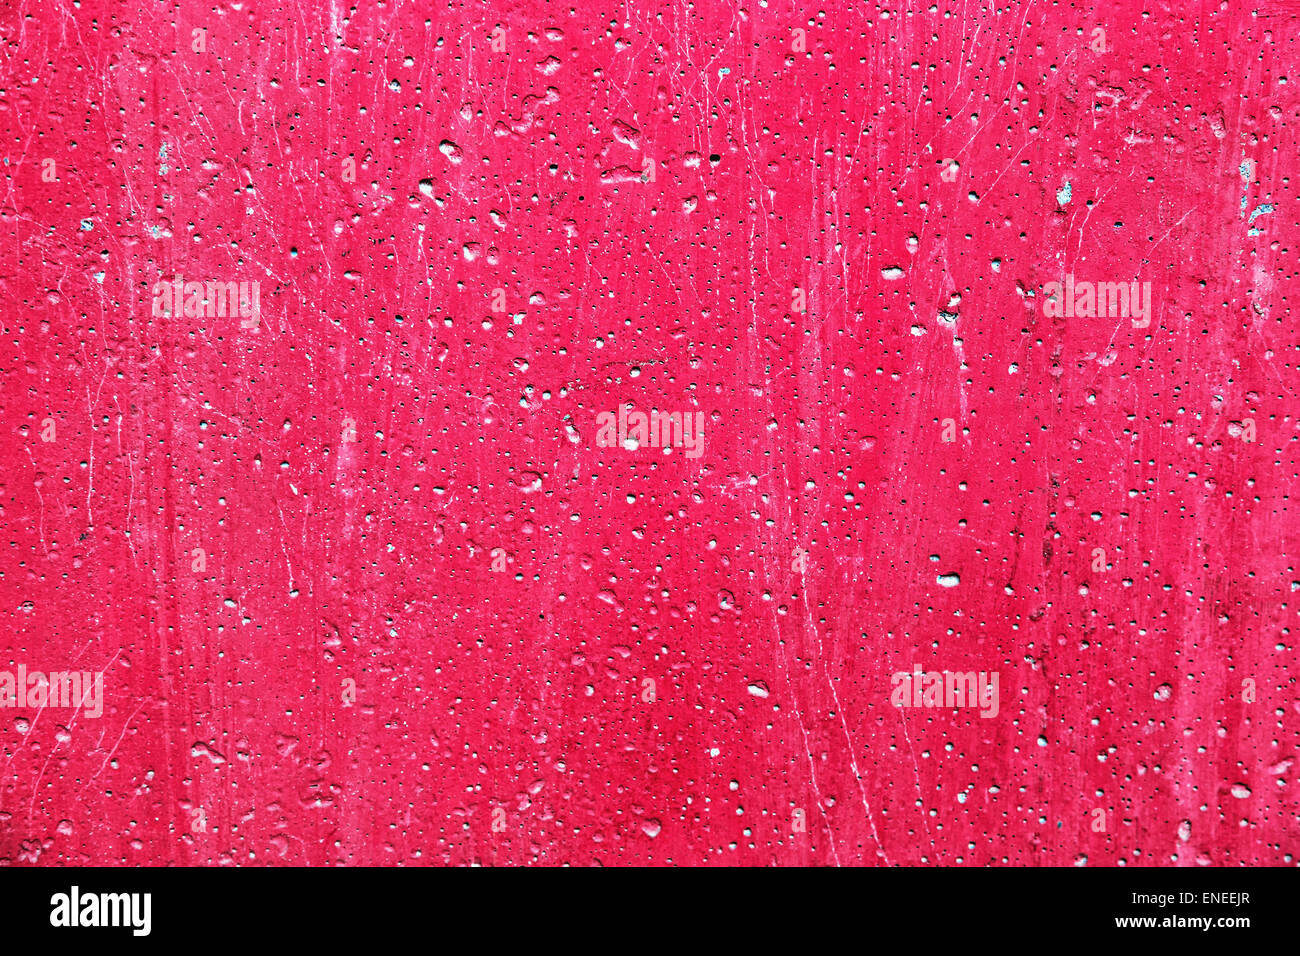 Grunge plaster cement or concrete wall texture pink color with scratches Stock Photo